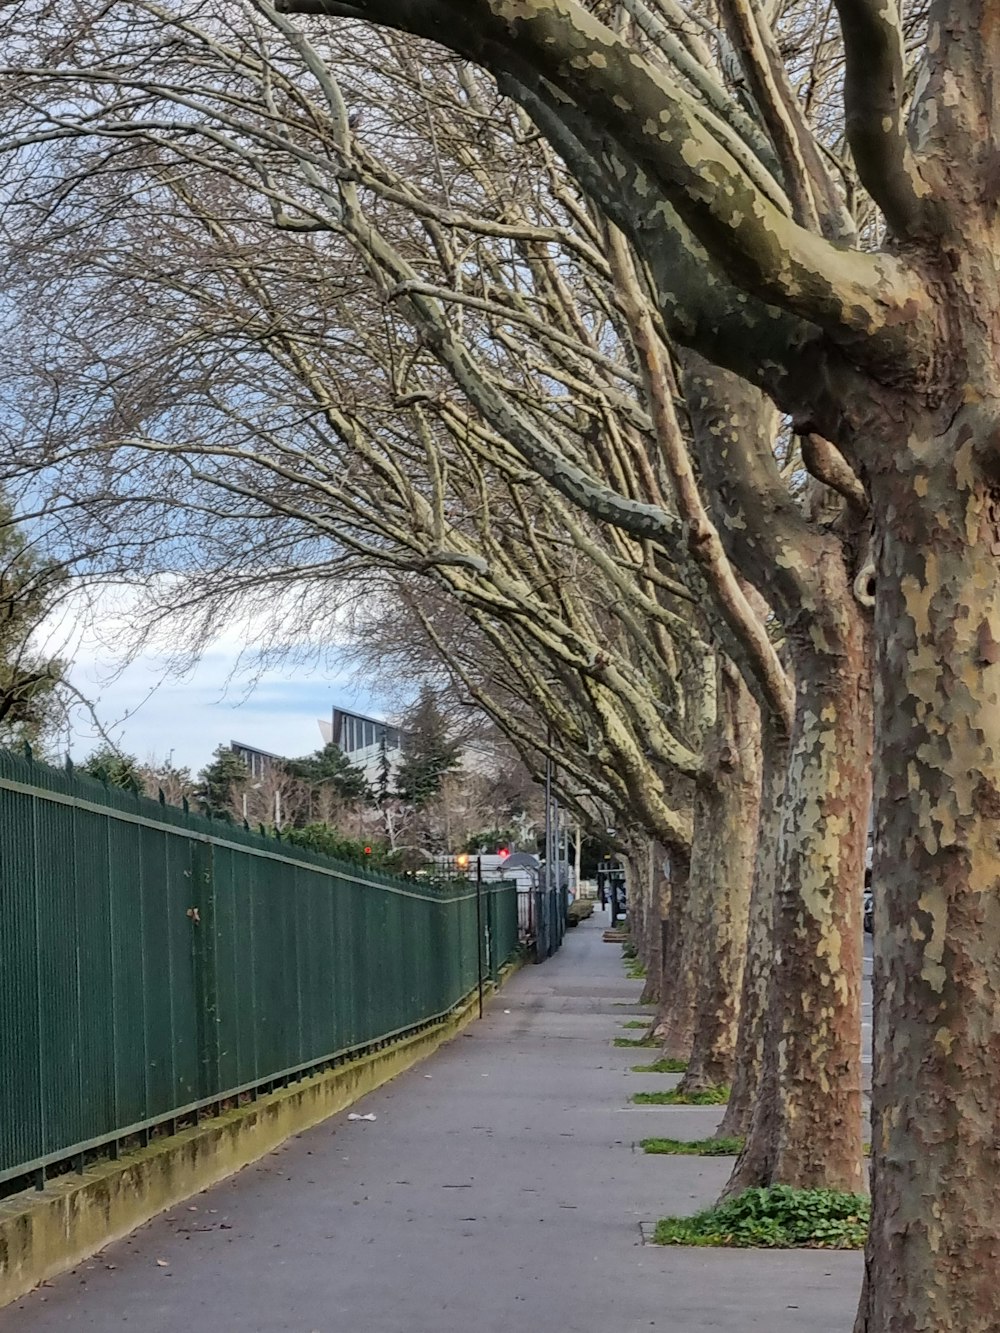 a street lined with trees next to a green fence